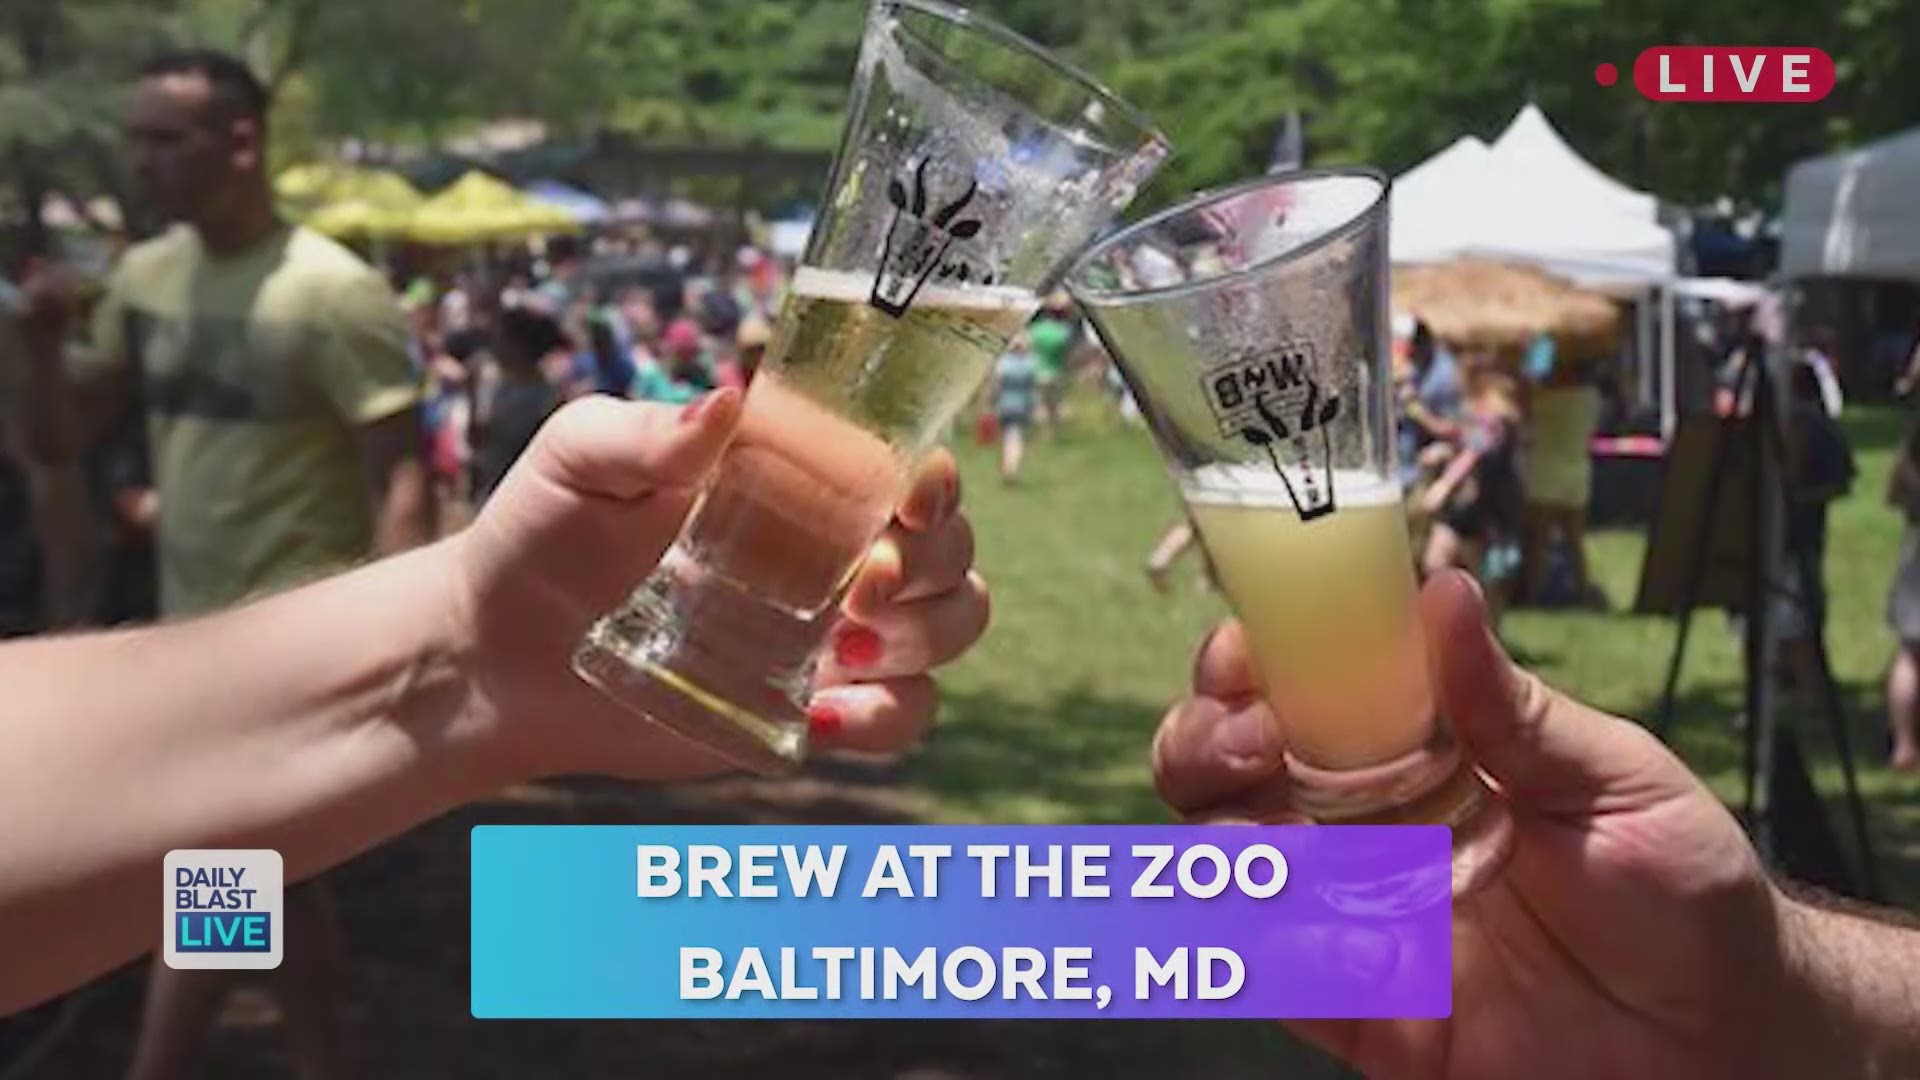 Memorial Day weekend is almost here and Daily Blast LIVE is bringing the best food and beer festivals happening nationwide over the long weekend. From Maryland's "Brew at the Zoo" to the New Orleans Wine and Food Festival, DBL is sharing all the delicious